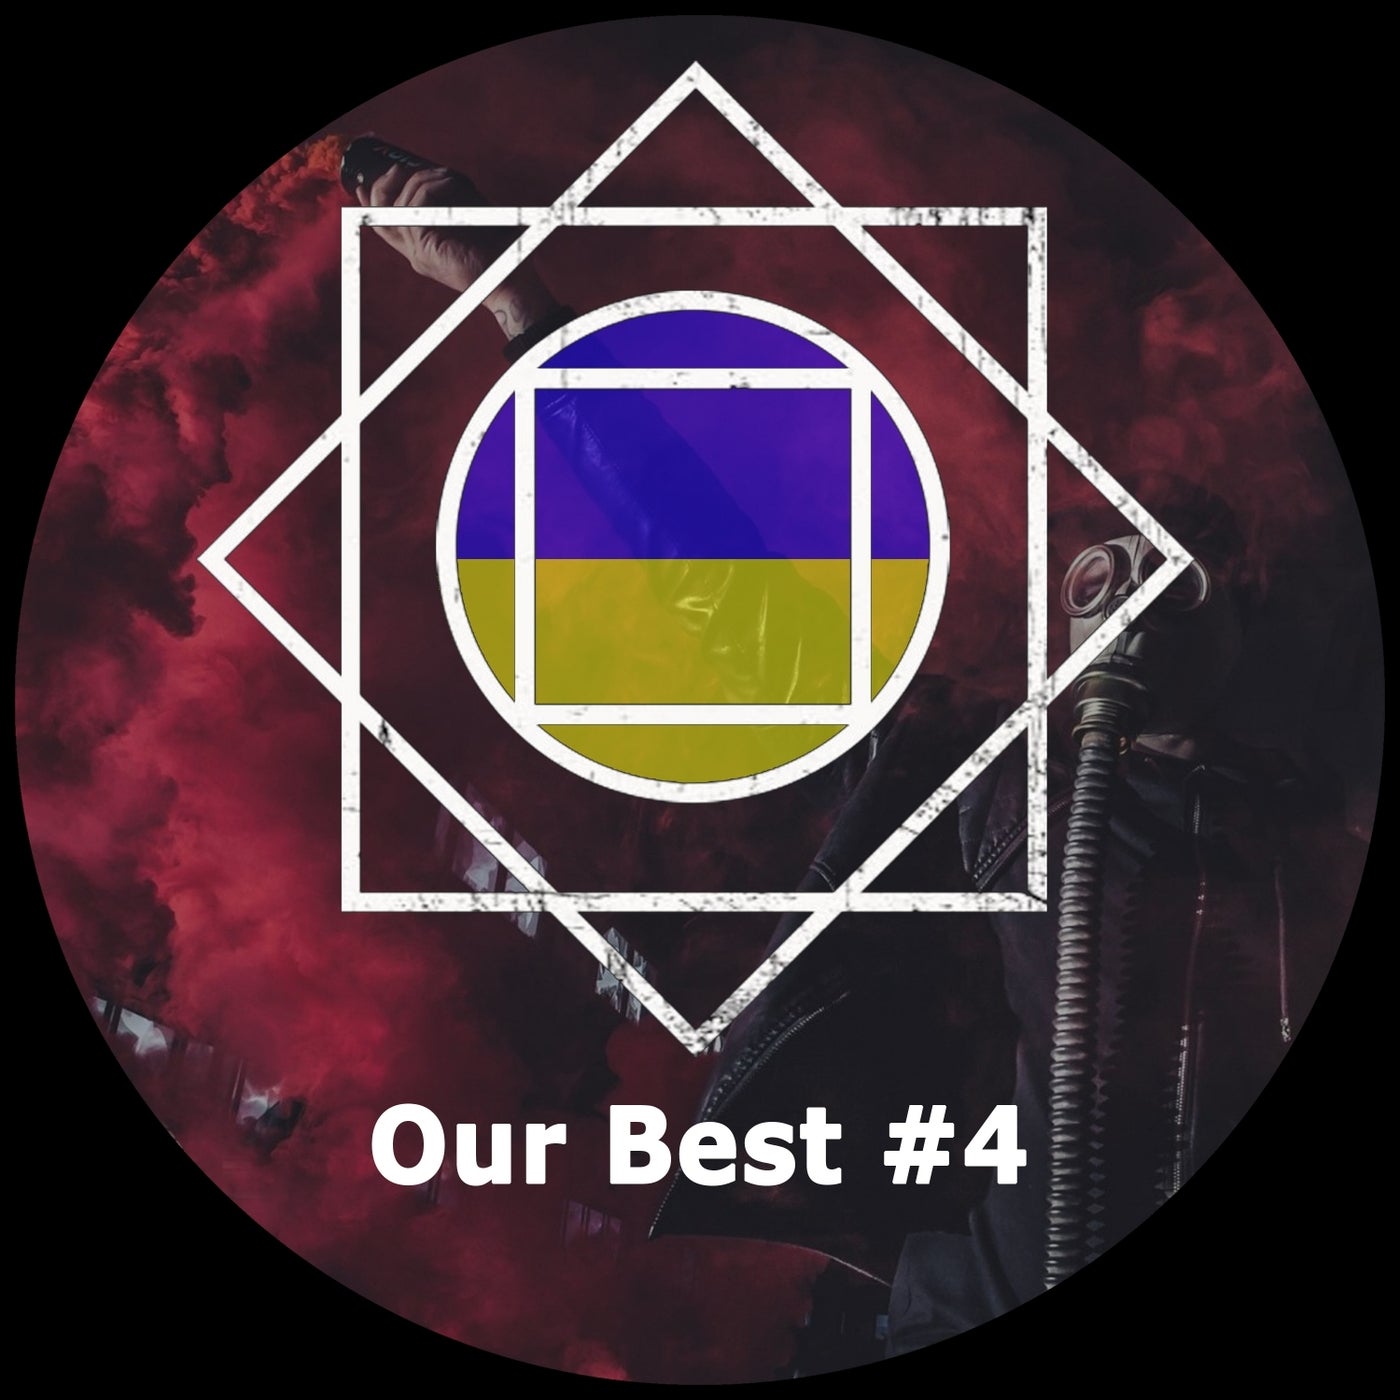 Our Best #4 from Back In Black on Beatport